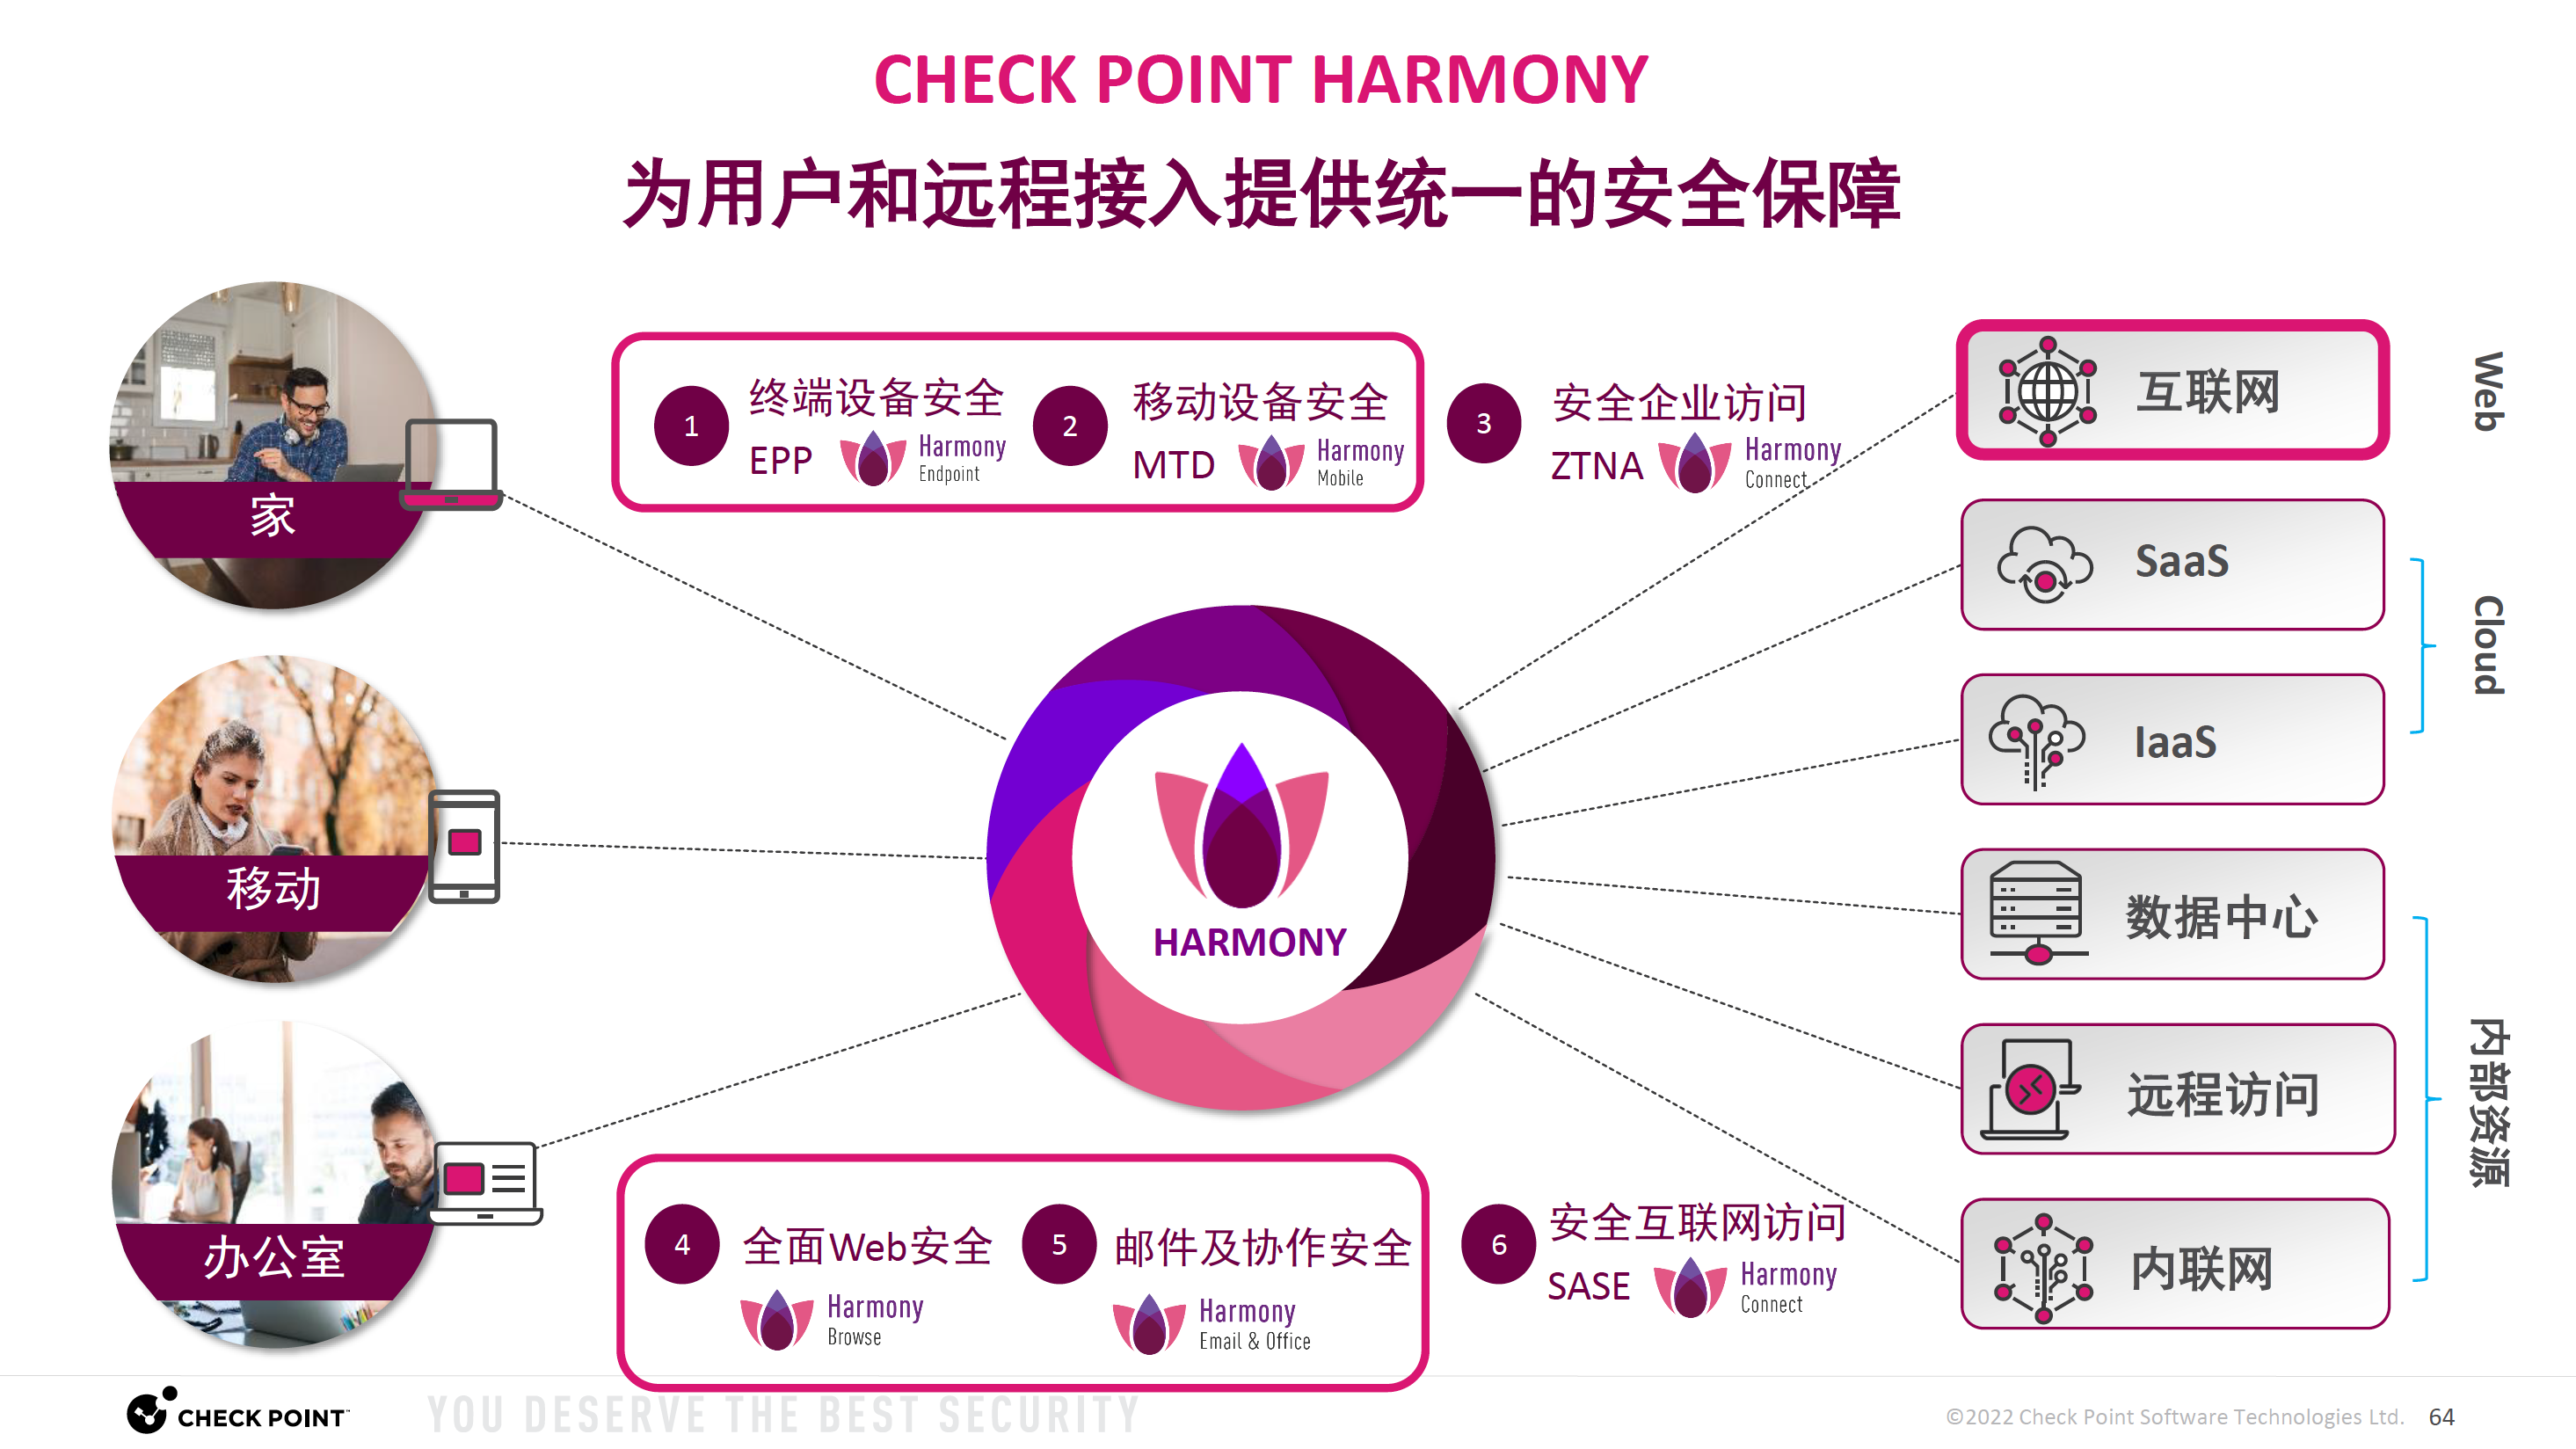 CheckPoint Email、CheckPoint CPSM-PU003-E、CheckPoint Harmony Email、CheckPoint Email、CheckPoint CP-HAR-TOTAL-1Y、CheckPoint Harmony Email、CheckPoint Email、CheckPoint CP-HAR-TOTAL-2Y、CheckPoint Harmony Email、CheckPoint Email、CheckPoint CP-HAR-TOTAL-3Y、CheckPoint Harmony Email、CheckPoint Email、CheckPoint CP-HAR-TOTAL-4Y、CheckPoint Harmony Email、CheckPoint Email、CheckPoint CP-HAR-TOTAL-5Y、CheckPoint Harmony Email、CheckPoint Email、CheckPoint CP-HAR-EC-PROTECT-EMAIL-1Y、CheckPoint Harmony Email、CheckPoint Email、CheckPoint CP-HAR-EC-PROTECT-EMAIL-2Y、CheckPoint Harmony Email、CheckPoint Email、CheckPoint CP-HAR-EC-PROTECT-EMAIL-3Y、CheckPoint Harmony Email、CheckPoint Email、CheckPoint CP-HAR-EC-PROTECT-EMAIL-4Y、CheckPoint Harmony Email、CheckPoint Email、CheckPoint CP-HAR-EC-PROTECT-EMAIL-5Y、CheckPoint Harmony Email、CheckPoint Email、CheckPoint CP-HAR-EC-ADV-EMAIL-1Y、CheckPoint Harmony Email、CheckPoint Email、CheckPoint CP-HAR-EC-ADV-EMAIL-2Y、CheckPoint Harmony Email、CheckPoint Email、CheckPoint CP-HAR-EC-ADV-EMAIL-3Y、CheckPoint Harmony Email、CheckPoint Email、CheckPoint CP-HAR-EC-ADV-EMAIL-4Y、CheckPoint Harmony Email、CheckPoint Email、CheckPoint CP-HAR-EC-ADV-EMAIL-5Y、CheckPoint Harmony Email、CheckPoint Email、CheckPoint CP-HAR-EC-COMP-EMAIL-1Y、CheckPoint Harmony Email、CheckPoint Email、CheckPoint CP-HAR-EC-COMP-EMAIL-2Y、CheckPoint Harmony Email、CheckPoint Email、CheckPoint CP-HAR-EC-COMP-EMAIL-3Y、CheckPoint Harmony Email、CheckPoint Email、CheckPoint CP-HAR-EC-COMP-EMAIL-4Y、CheckPoint Harmony Email、CheckPoint Email、CheckPoint CP-HAR-EC-COMP-EMAIL-5Y、CheckPoint Harmony Email、CheckPoint Email、CheckPoint CP-HAR-EC-PROTECT-EMAIL-APPS-1Y、CheckPoint Harmony Email、CheckPoint Email、CheckPoint CP-HAR-EC-PROTECT-EMAIL-APPS-2Y、CheckPoint Harmony Email、CheckPoint Email、CheckPoint CP-HAR-EC-PROTECT-EMAIL-APPS-3Y、CheckPoint Harmony Email、CheckPoint Email、CheckPoint CP-HAR-EC-PROTECT-EMAIL-APPS-4Y、CheckPoint Harmony Email、CheckPoint Email、CheckPoint CP-HAR-EC-PROTECT-EMAIL-APPS-5Y、CheckPoint Harmony Email、CheckPoint Email、CheckPoint CP-HAR-EC-ADV-EMAIL-APPS-1Y、CheckPoint Harmony Email、CheckPoint Email、CheckPoint CP-HAR-EC-ADV-EMAIL-APPS-2Y、CheckPoint Harmony Email、CheckPoint Email、CheckPoint CP-HAR-EC-ADV-EMAIL-APPS-3Y、CheckPoint Harmony Email、CheckPoint Email、CheckPoint CP-HAR-EC-ADV-EMAIL-APPS-4Y、CheckPoint Harmony Email、CheckPoint Email、CheckPoint CP-HAR-EC-ADV-EMAIL-APPS-5Y、CheckPoint Harmony Email、CheckPoint Email、CheckPoint CP-HAR-EC-COMP-EMAIL-APPS-1Y、CheckPoint Harmony Email、CheckPoint Email、CheckPoint CP-HAR-EC-COMP-EMAIL-APPS-2Y、CheckPoint Harmony Email、CheckPoint Email、CheckPoint CP-HAR-EC-COMP-EMAIL-APPS-3Y、CheckPoint Harmony Email、CheckPoint Email、CheckPoint CP-HAR-EC-COMP-EMAIL-APPS-4Y、CheckPoint Harmony Email、CheckPoint Email、CheckPoint CP-HAR-EC-COMP-EMAIL-APPS-5Y、CheckPoint Harmony MOBILE、CheckPoint Mobile、CheckPoint CP-HAR-MOBILE-DVC-1Y、CheckPoint Harmony MOBILE、CheckPoint Mobile、CheckPoint CP-HAR-MOBILE-DVC-2Y、CheckPoint Harmony MOBILE、CheckPoint Mobile、CheckPoint CP-HAR-MOBILE-DVC-3Y、CheckPoint Harmony MOBILE、CheckPoint Mobile、CheckPoint CP-HAR-MOBILE-DVC-4Y、CheckPoint Harmony MOBILE、CheckPoint Mobile、CheckPoint CP-HAR-MOBILE-DVC-5Y、CheckPoint Harmony MOBILE、CheckPoint Mobile、CheckPoint CP-HAR-MOBILE-DVC-EP-ADVANCED-BUN-1Y、CheckPoint Harmony MOBILE、CheckPoint Mobile、CheckPoint CP-HAR-MOBILE-DVC-EP-ADVANCED-BUN-2Y、CheckPoint Harmony MOBILE、CheckPoint Mobile、CheckPoint CP-HAR-MOBILE-DVC-EP-ADVANCED-BUN-3Y、CheckPoint Harmony MOBILE、CheckPoint Mobile、CheckPoint CP-HAR-MOBILE-DVC-EP-ADVANCED-BUN-4Y、CheckPoint Harmony MOBILE、CheckPoint Mobile、CheckPoint CP-HAR-MOBILE-DVC-EP-ADVANCED-BUN-5Y、CheckPoint Harmony MOBILE、CheckPoint Mobile、CheckPoint CP-HAR-MOBILE-DVC-EP-COMPLETE-BUN-1Y、CheckPoint Harmony MOBILE、CheckPoint Mobile、CheckPoint CP-HAR-MOBILE-DVC-EP-COMPLETE-BUN-2Y、CheckPoint Harmony MOBILE、CheckPoint Mobile、CheckPoint CP-HAR-MOBILE-DVC-EP-COMPLETE-BUN-3Y、CheckPoint Harmony MOBILE、CheckPoint Mobile、CheckPoint CP-HAR-MOBILE-DVC-EP-COMPLETE-BUN-4Y、CheckPoint Harmony MOBILE、CheckPoint Mobile、CheckPoint CP-HAR-MOBILE-DVC-EP-COMPLETE-BUN-5Y、CheckPoint Harmony MOBILE、CheckPoint Mobile、CheckPoint CP-HAR-MOBILE-USR3D-1Y、CheckPoint Harmony MOBILE、CheckPoint Mobile、CheckPoint CP-HAR-MOBILE-USR3D-2Y、CheckPoint Harmony MOBILE、CheckPoint Mobile、CheckPoint CP-HAR-MOBILE-USR3D-3Y、CheckPoint Harmony MOBILE、CheckPoint Mobile、CheckPoint CP-HAR-MOBILE-USR3D-4Y、CheckPoint Harmony MOBILE、CheckPoint Mobile、CheckPoint CP-HAR-MOBILE-USR3D-5Y、CheckPoint Harmony MOBILE、CheckPoint Mobile、CheckPoint CP-HAR-TOTAL-1Y、CheckPoint Harmony MOBILE、CheckPoint Mobile、CheckPoint CP-HAR-TOTAL-2Y、CheckPoint Harmony MOBILE、CheckPoint Mobile、CheckPoint CP-HAR-TOTAL-3Y、CheckPoint Harmony MOBILE、CheckPoint Mobile、CheckPoint CP-HAR-TOTAL-4Y、CheckPoint Harmony MOBILE、CheckPoint Mobile、CheckPoint CP-HAR-TOTAL-5Y、CheckPoint Harmony Endpoint、CheckPoint Endpoint、CheckPoint CP-HAR-ENDPOINT-1Y、CheckPoint Harmony Endpoint、CheckPoint Endpoint、CheckPoint CP-HAR-ENDPOINT-2Y、CheckPoint Harmony Endpoint、CheckPoint Endpoint、CheckPoint CP-HAR-ENDPOINT-3Y、CheckPoint Harmony Endpoint、CheckPoint Endpoint、CheckPoint CP-HAR-ENDPOINT-4Y、CheckPoint Harmony Endpoint、CheckPoint Endpoint、CheckPoint CP-HAR-ENDPOINT-5Y、CheckPoint Harmony Endpoint、CheckPoint Endpoint、CheckPoint CP-HAR-EP-ADVANCED-1Y、CheckPoint Harmony Endpoint、CheckPoint Endpoint、CheckPoint CP-HAR-EP-ADVANCED-2Y、CheckPoint Harmony Endpoint、CheckPoint Endpoint、CheckPoint CP-HAR-EP-ADVANCED-3Y、CheckPoint Harmony Endpoint、CheckPoint Endpoint、CheckPoint CP-HAR-EP-ADVANCED-4Y、CheckPoint Harmony Endpoint、CheckPoint Endpoint、CheckPoint CP-HAR-EP-ADVANCED-5Y、CheckPoint Harmony Endpoint、CheckPoint Endpoint、CheckPoint CP-HAR-EP-BASIC-1Y、CheckPoint Harmony Endpoint、CheckPoint Endpoint、CheckPoint CP-HAR-EP-BASIC-2Y、CheckPoint Harmony Endpoint、CheckPoint Endpoint、CheckPoint CP-HAR-EP-BASIC-3Y、CheckPoint Harmony Endpoint、CheckPoint Endpoint、CheckPoint CP-HAR-EP-BASIC-4Y、CheckPoint Harmony Endpoint、CheckPoint Endpoint、CheckPoint CP-HAR-EP-BASIC-5Y、CheckPoint Harmony Endpoint、CheckPoint Endpoint、CheckPoint CP-HAR-EP-COMPLETE-1Y、CheckPoint Harmony Endpoint、CheckPoint Endpoint、CheckPoint CP-HAR-EP-COMPLETE-2Y、CheckPoint Harmony Endpoint、CheckPoint Endpoint、CheckPoint CP-HAR-EP-COMPLETE-3Y、CheckPoint Harmony Endpoint、CheckPoint Endpoint、CheckPoint CP-HAR-EP-COMPLETE-4Y、CheckPoint Harmony Endpoint、CheckPoint Endpoint、CheckPoint CP-HAR-EP-COMPLETE-5Y、CheckPoint Harmony Endpoint、CheckPoint Endpoint、CheckPoint CP-HAR-MOBILE-DVC-EP-ADVANCED-BUN-1Y、CheckPoint Harmony Endpoint、CheckPoint Endpoint、CheckPoint CP-HAR-MOBILE-DVC-EP-ADVANCED-BUN-2Y、CheckPoint Harmony Endpoint、CheckPoint Endpoint、CheckPoint CP-HAR-MOBILE-DVC-EP-ADVANCED-BUN-3Y、CheckPoint Harmony Endpoint、CheckPoint Endpoint、CheckPoint CP-HAR-MOBILE-DVC-EP-ADVANCED-BUN-4Y、CheckPoint Harmony Endpoint、CheckPoint Endpoint、CheckPoint CP-HAR-MOBILE-DVC-EP-ADVANCED-BUN-5Y、CheckPoint Harmony Endpoint、CheckPoint Endpoint、CheckPoint CP-HAR-MOBILE-DVC-EP-COMPLETE-BUN-1Y、CheckPoint Harmony Endpoint、CheckPoint Endpoint、CheckPoint CP-HAR-MOBILE-DVC-EP-COMPLETE-BUN-2Y、CheckPoint Harmony Endpoint、CheckPoint Endpoint、CheckPoint CP-HAR-MOBILE-DVC-EP-COMPLETE-BUN-3Y、CheckPoint Harmony Endpoint、CheckPoint Endpoint、CheckPoint CP-HAR-MOBILE-DVC-EP-COMPLETE-BUN-4Y、CheckPoint Harmony Endpoint、CheckPoint Endpoint、CheckPoint CP-HAR-MOBILE-DVC-EP-COMPLETE-BUN-5Y、CheckPoint Harmony Endpoint、CheckPoint Email、CheckPoint CP-HAR-TOTAL-1Y、CheckPoint Harmony Endpoint、CheckPoint Email、CheckPoint CP-HAR-TOTAL-2Y、CheckPoint Harmony Endpoint、CheckPoint Email、CheckPoint CP-HAR-TOTAL-3Y、CheckPoint Harmony Endpoint、CheckPoint Email、CheckPoint CP-HAR-TOTAL-4Y、CheckPoint Harmony Endpoint、CheckPoint Email、CheckPoint CP-HAR-TOTAL-5Y、CheckPoint Harmony Endpoint、CheckPoint Email、CheckPoint CPSM-P1003-E、CheckPoint Harmony Endpoint、CheckPoint Email、CheckPoint CPSM-P2503-E、CheckPoint Harmony Endpoint、